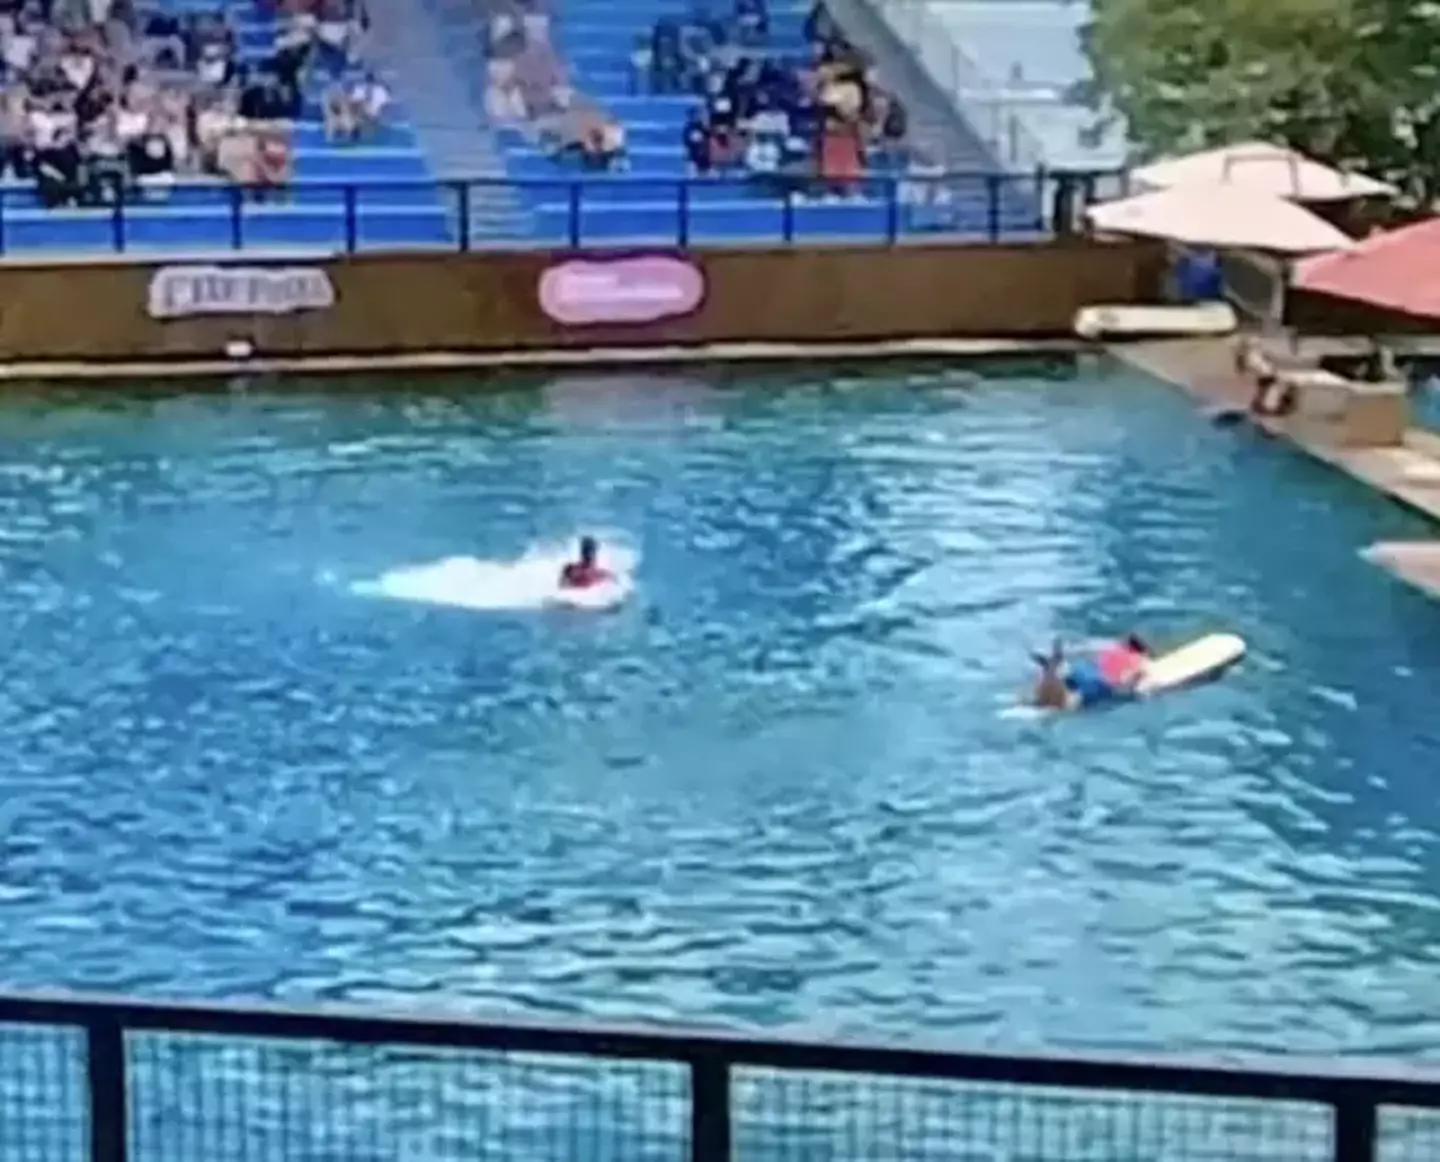 The moment the dolphin attacked was caught on camera.